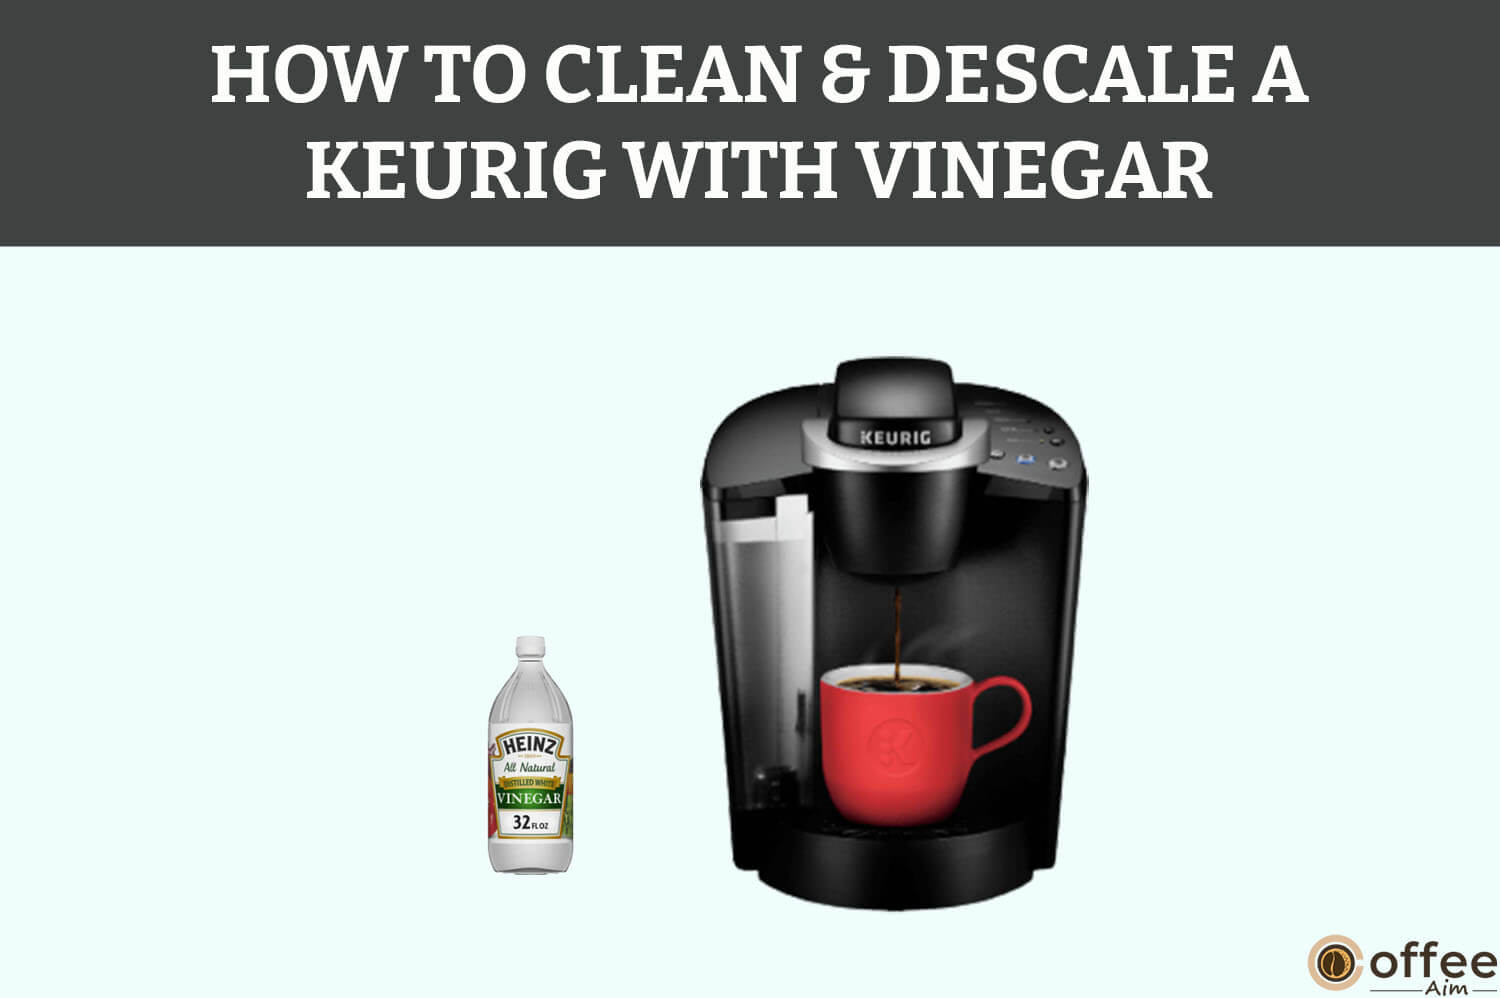 Featured image for the article "How to Clean & Descale a Keurig With Vinegar"